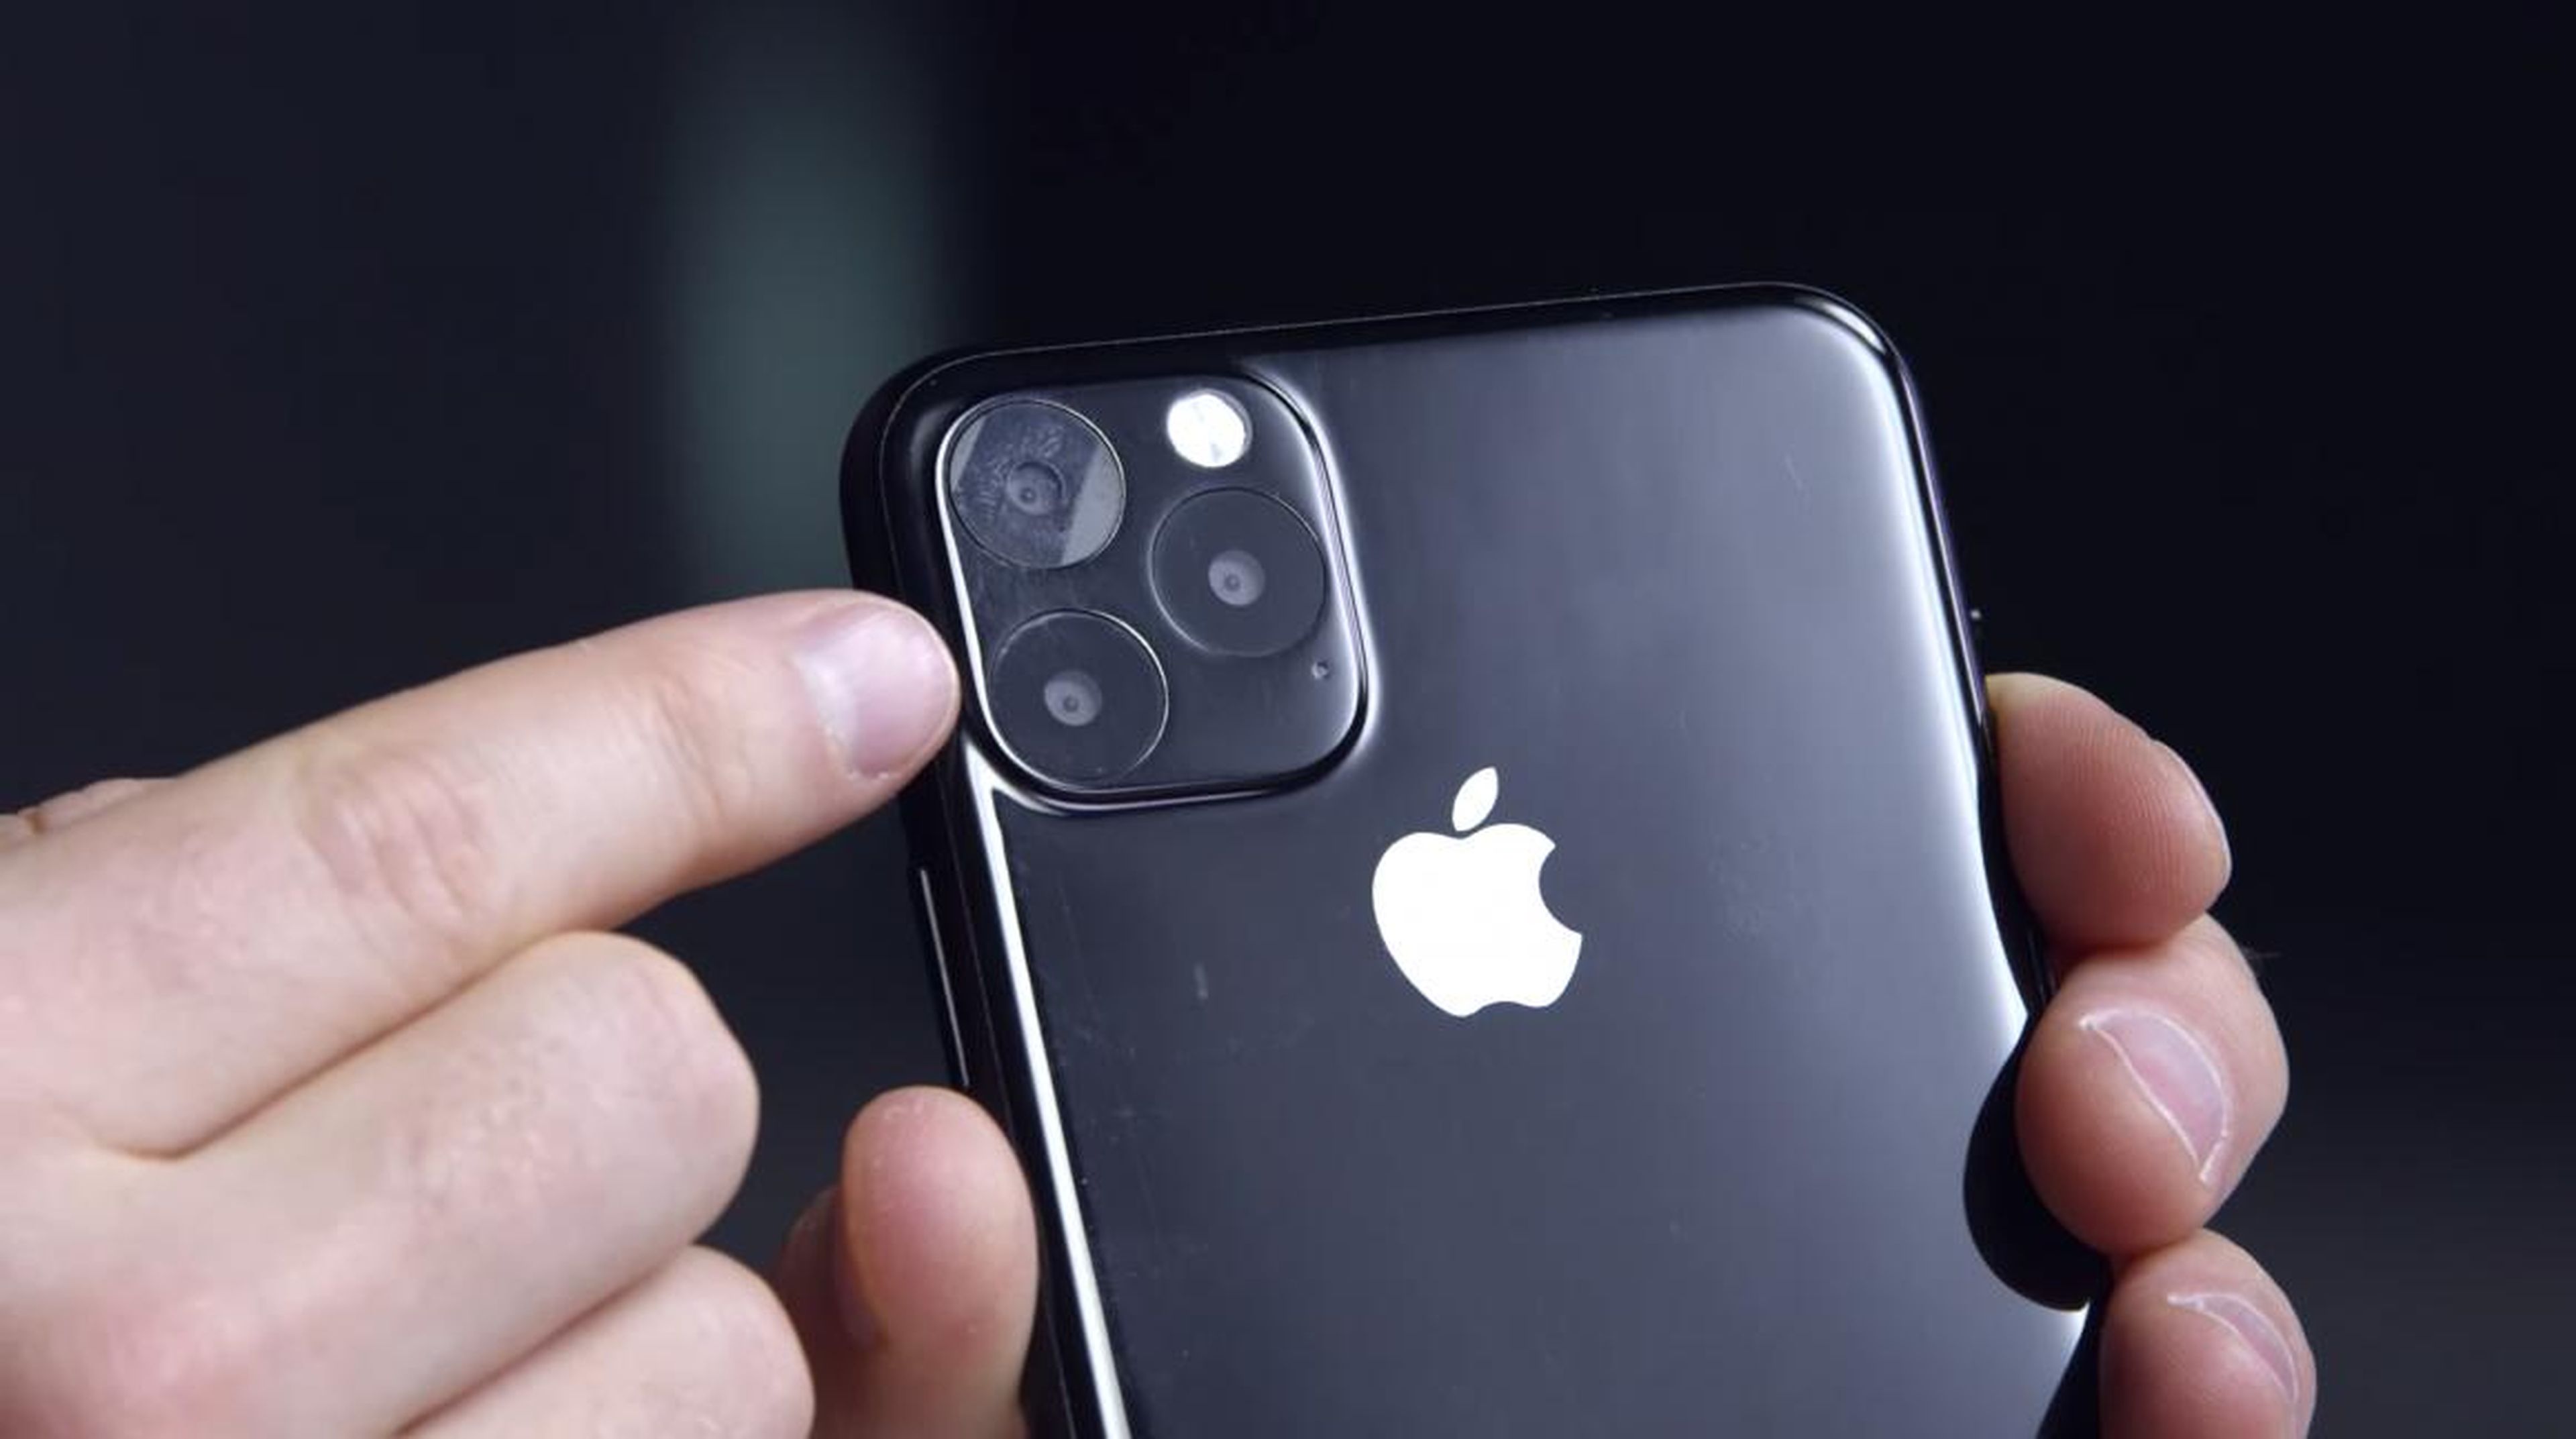 5 reasons you should buy the new iPhone 11, which is likely arriving in September